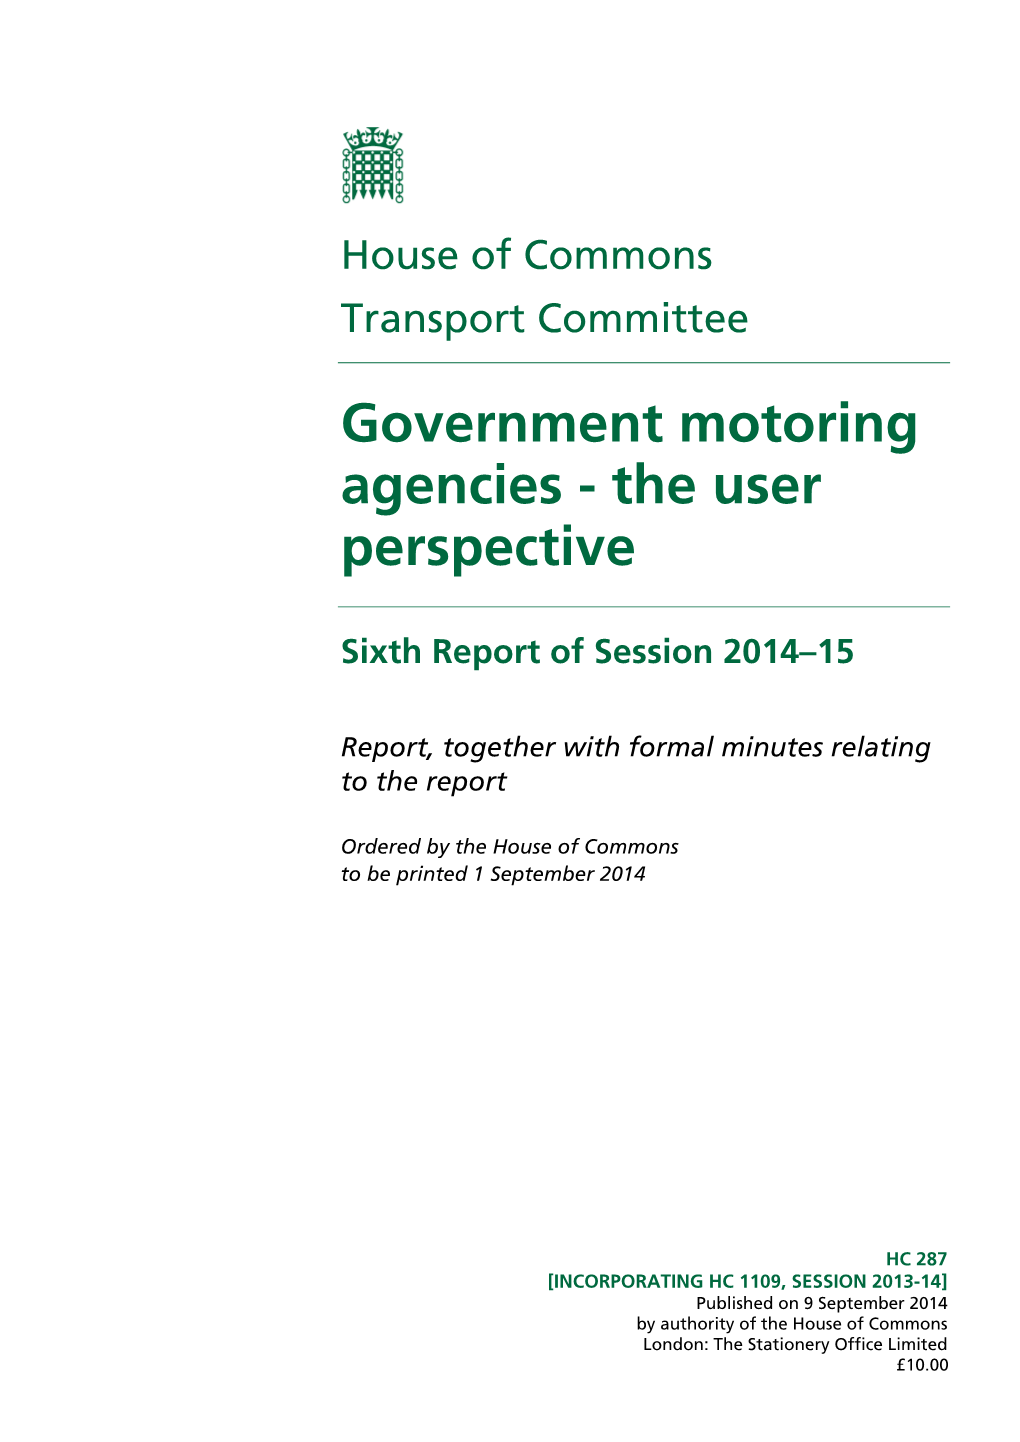 Government Motoring Agencies - the User Perspective